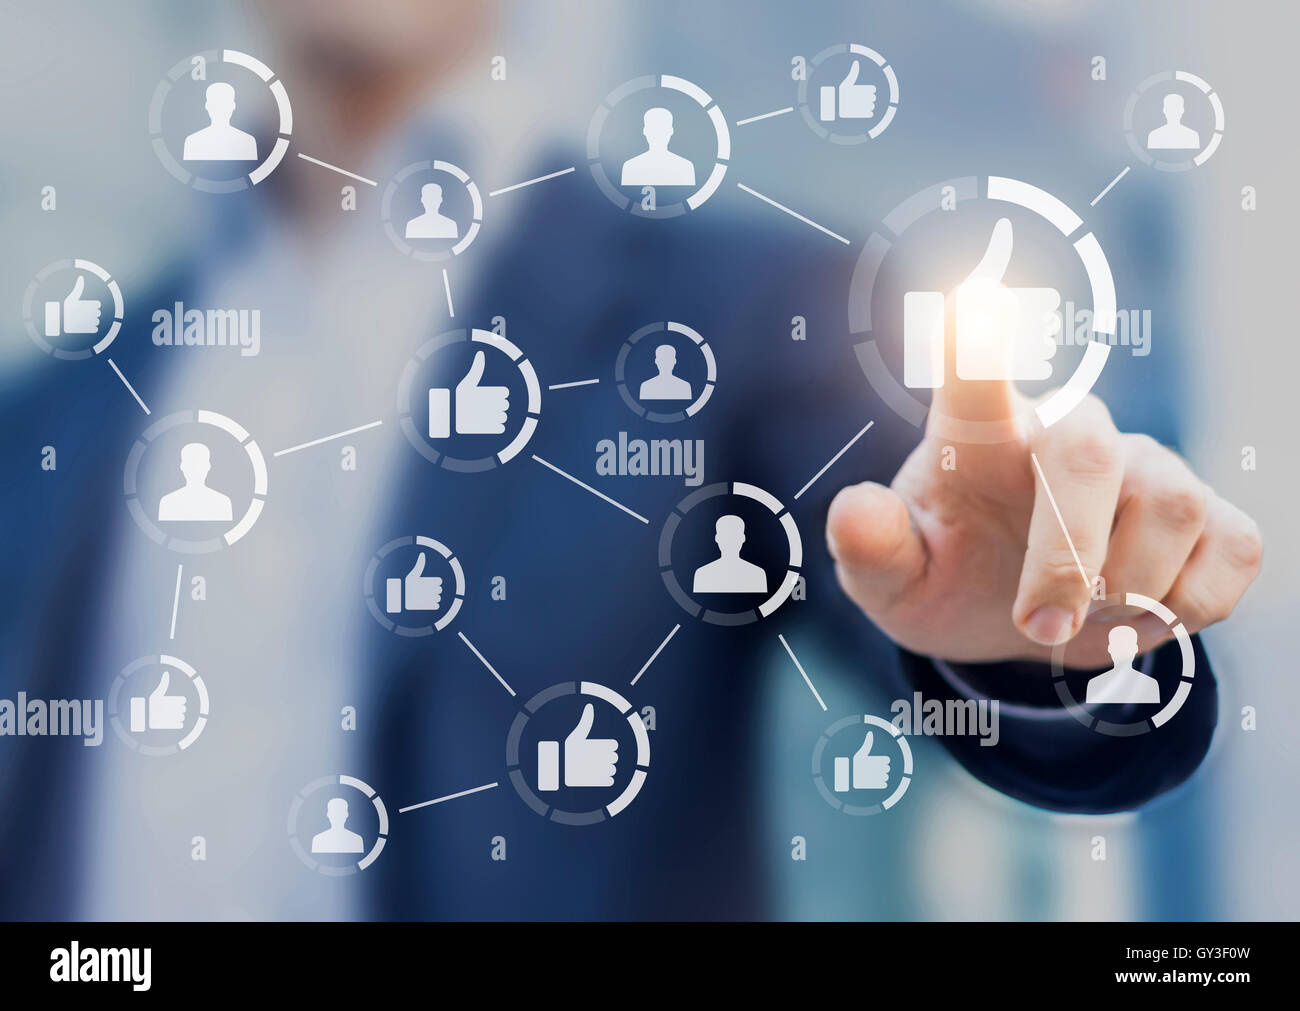 Person touching like buttons connected together. Concept about marketing, reputation management and social media networking Stock Photo